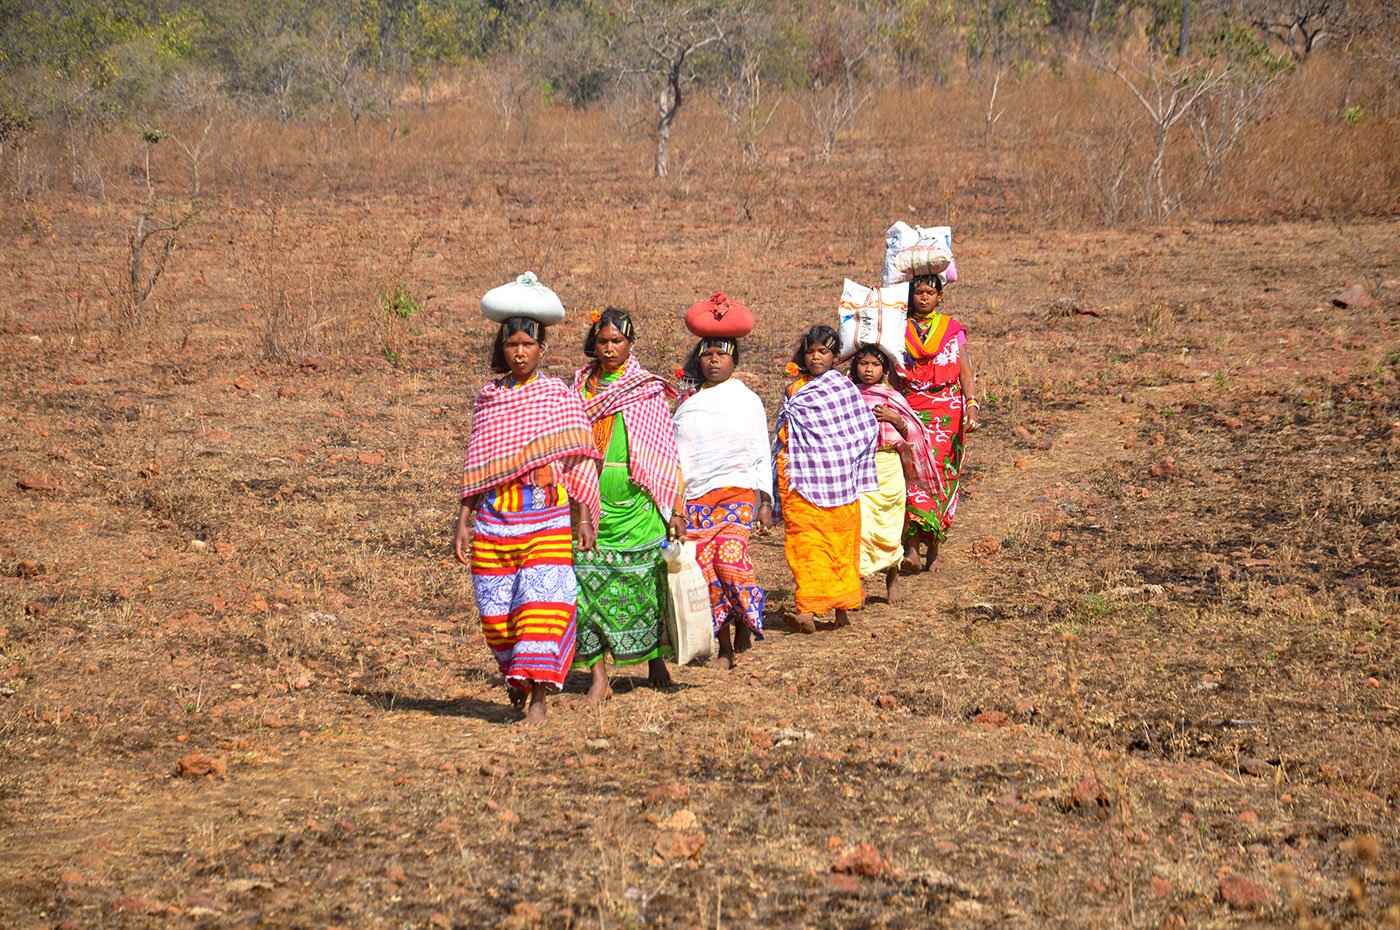 Tribal women walking in a field with a load on their heads